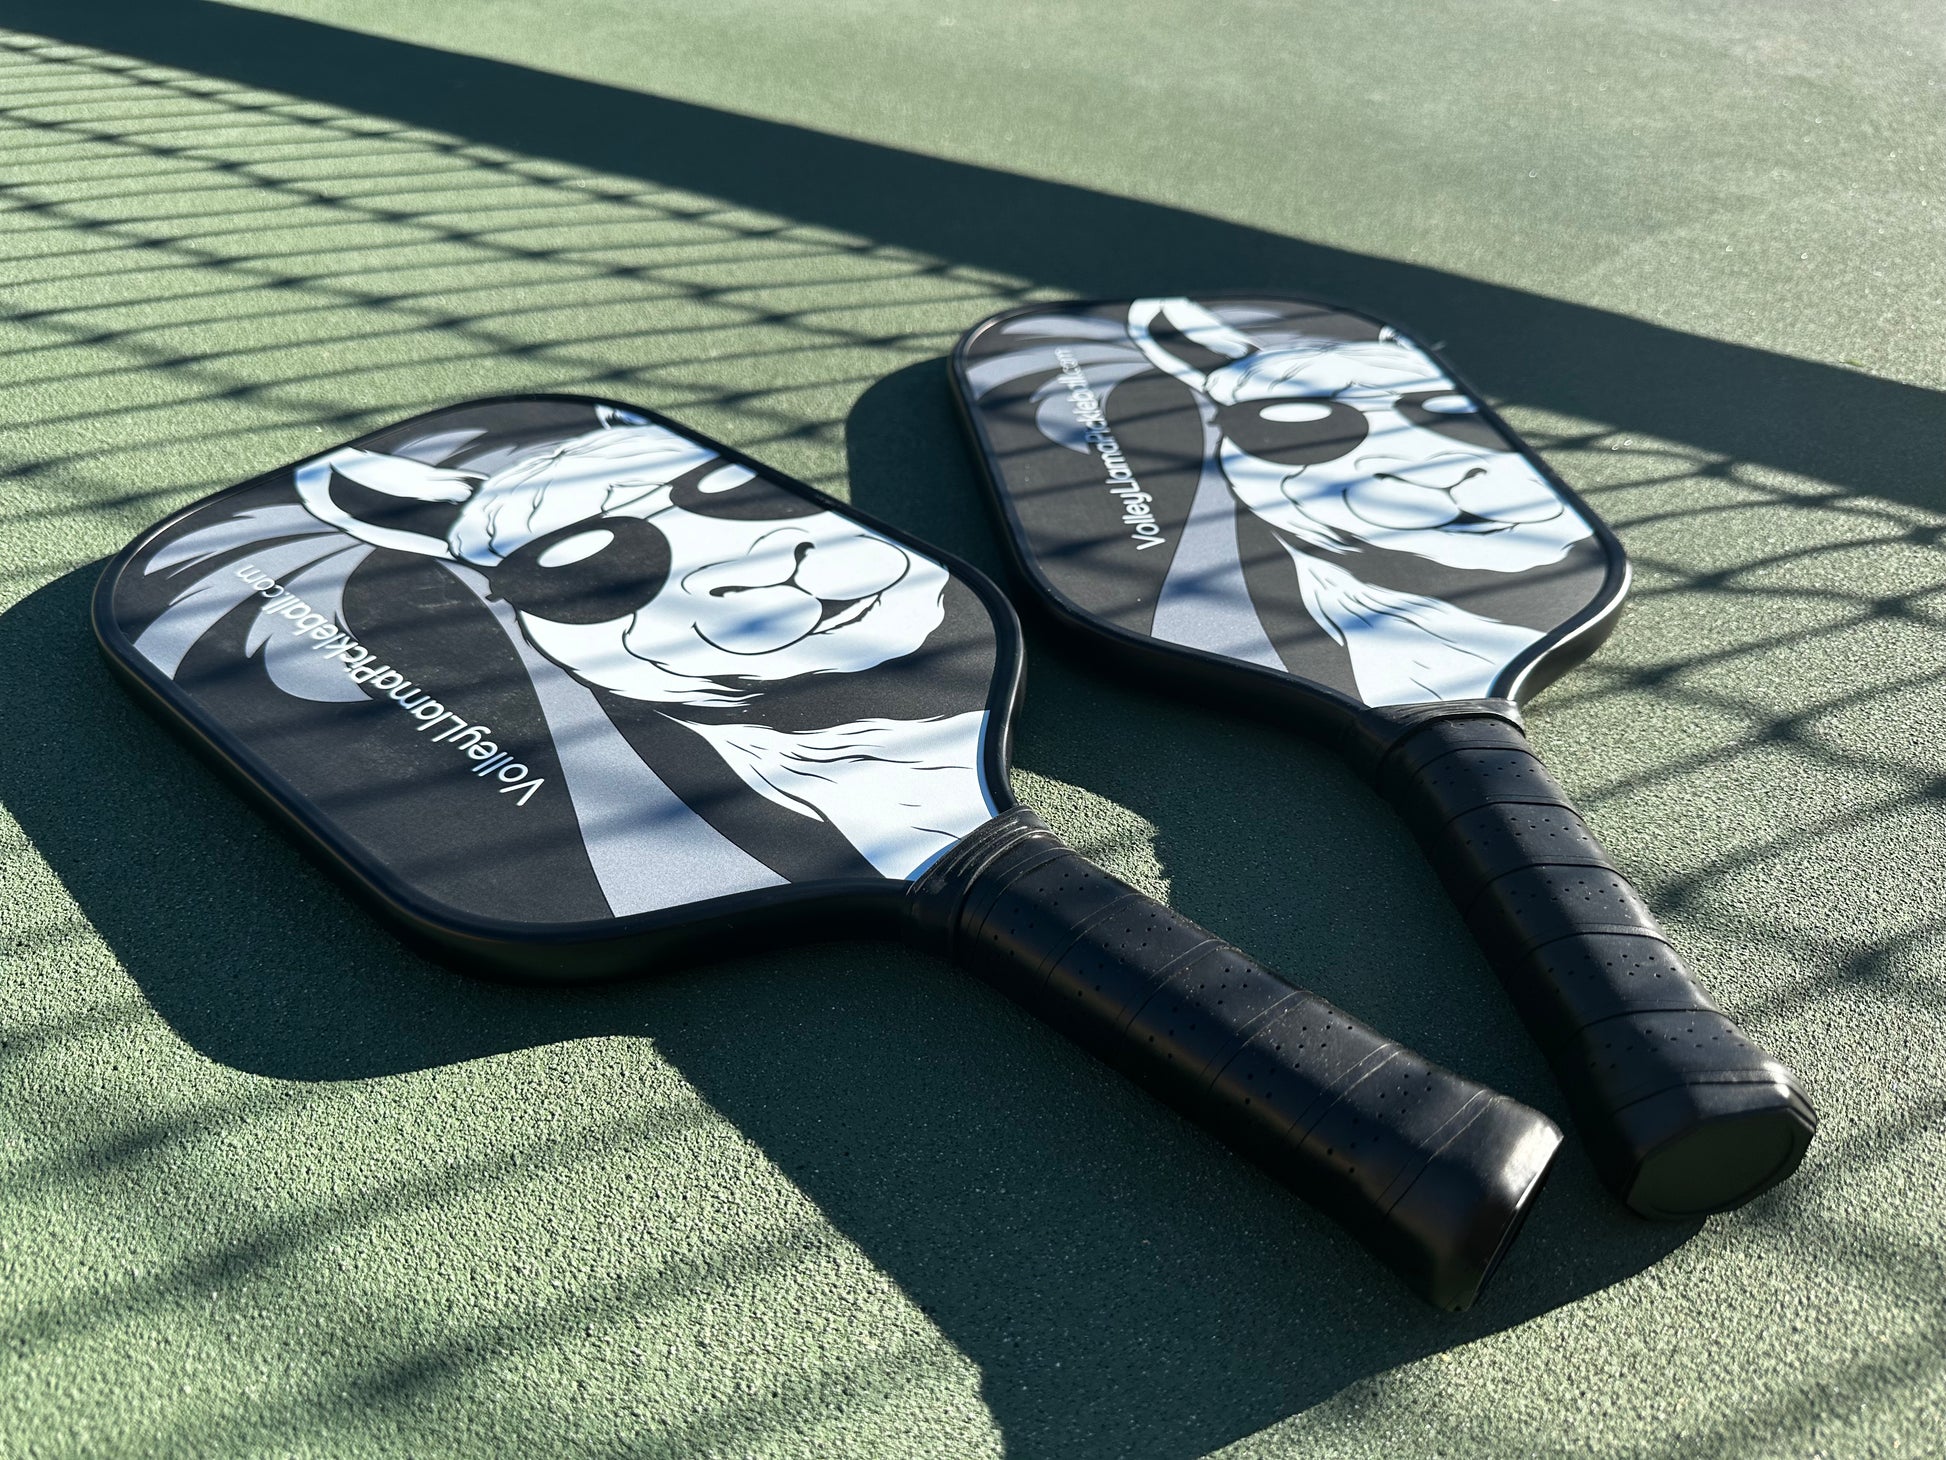 A pair of Holy Grail Pro Pickleball Paddles resting on the court in the shade of the net.